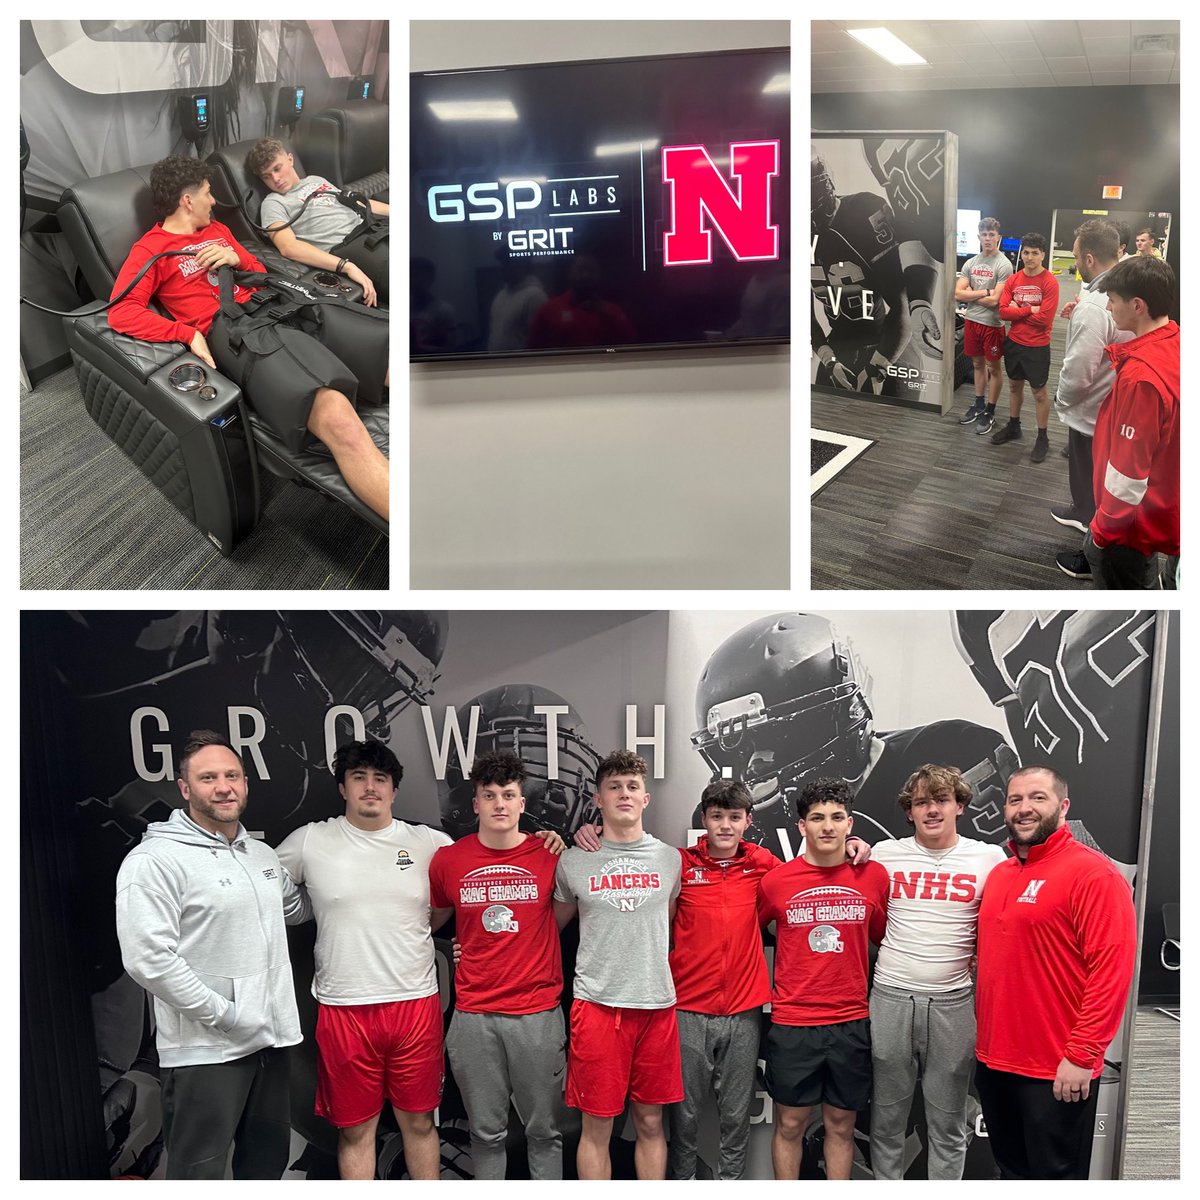 Huge shout out to @GRIT_SP for having some of our guys out to learn about the amazing services they provide! The @NeshannockFB program is looking forward to working with you soon! #BEGREAT